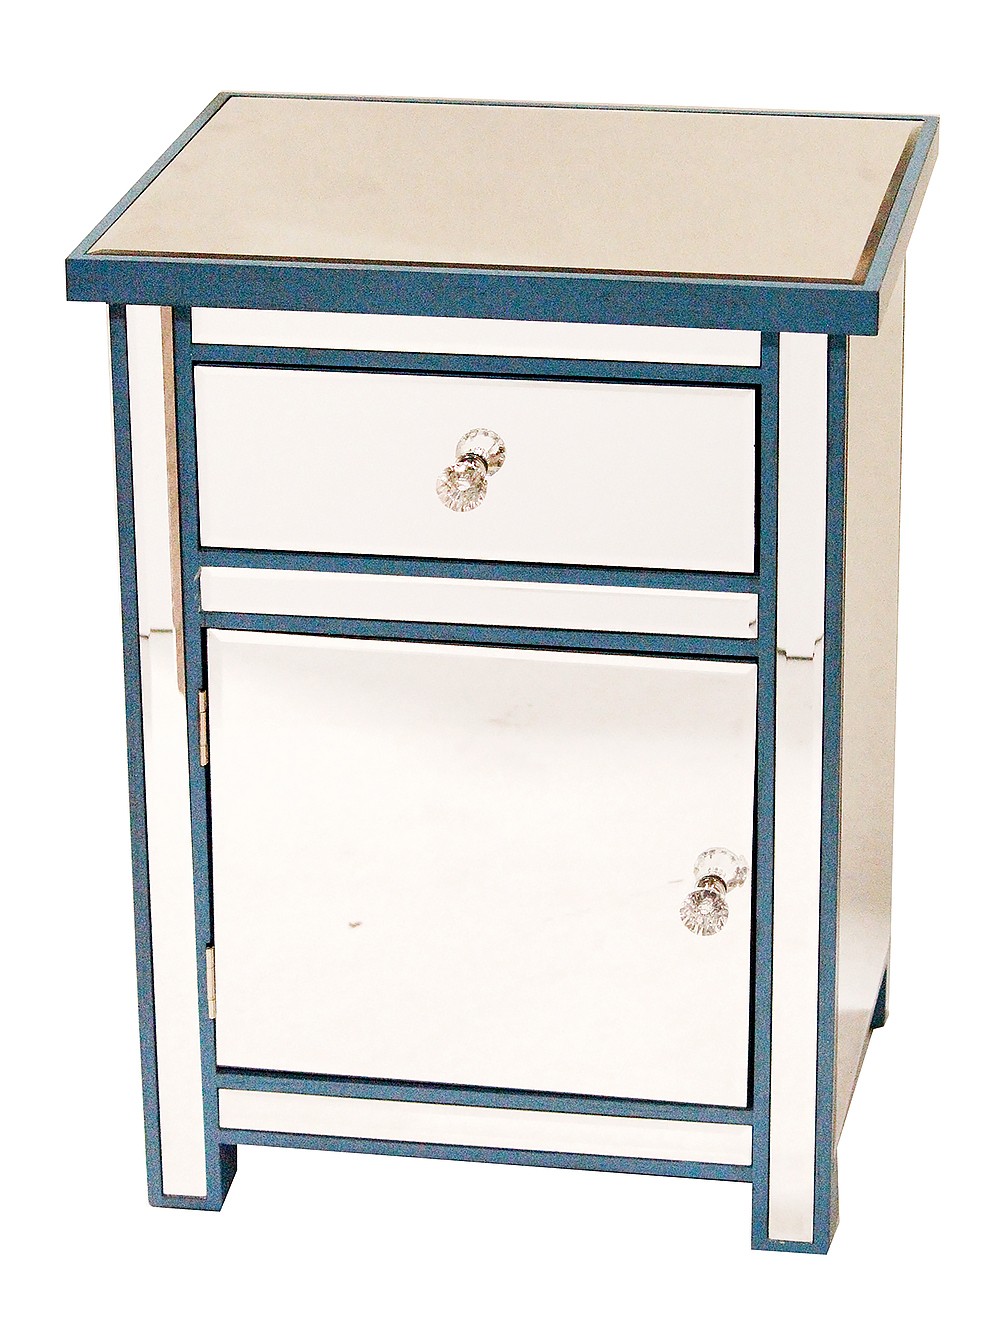 19.29" X 15.75" X 25.2" Blue MDF Wood Mirrored Glass Accent Cabinet with a Mirrored Glass Drawer and Door